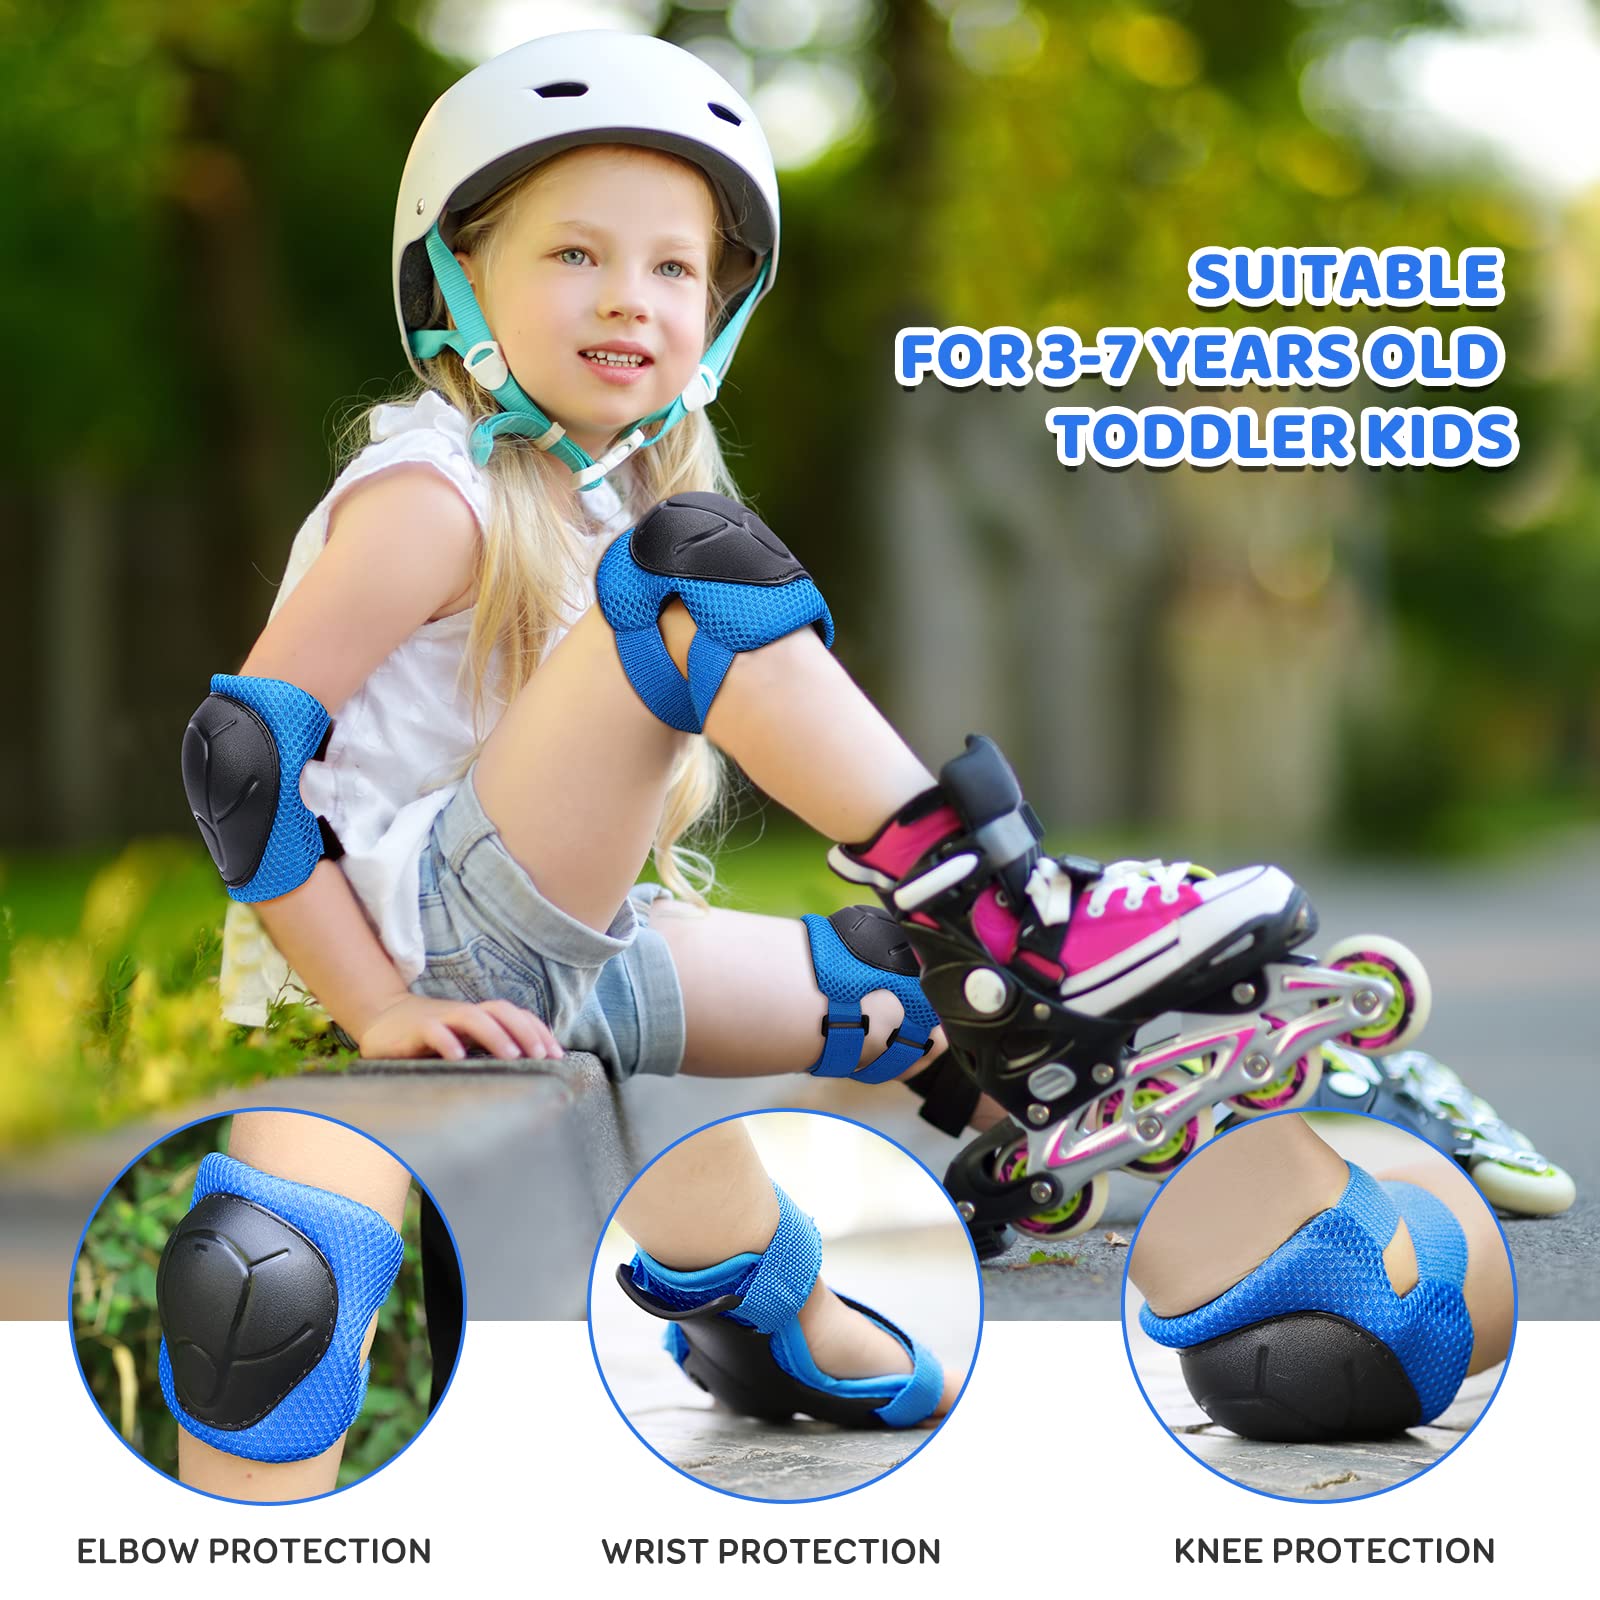 KUYOU Kids Knee Pads Elbow Pads Guards Protective Gear Set Safety Gear for Roller Skates Cycling BMX Bike Skateboard Inline Skatings Scooter Riding Sports.